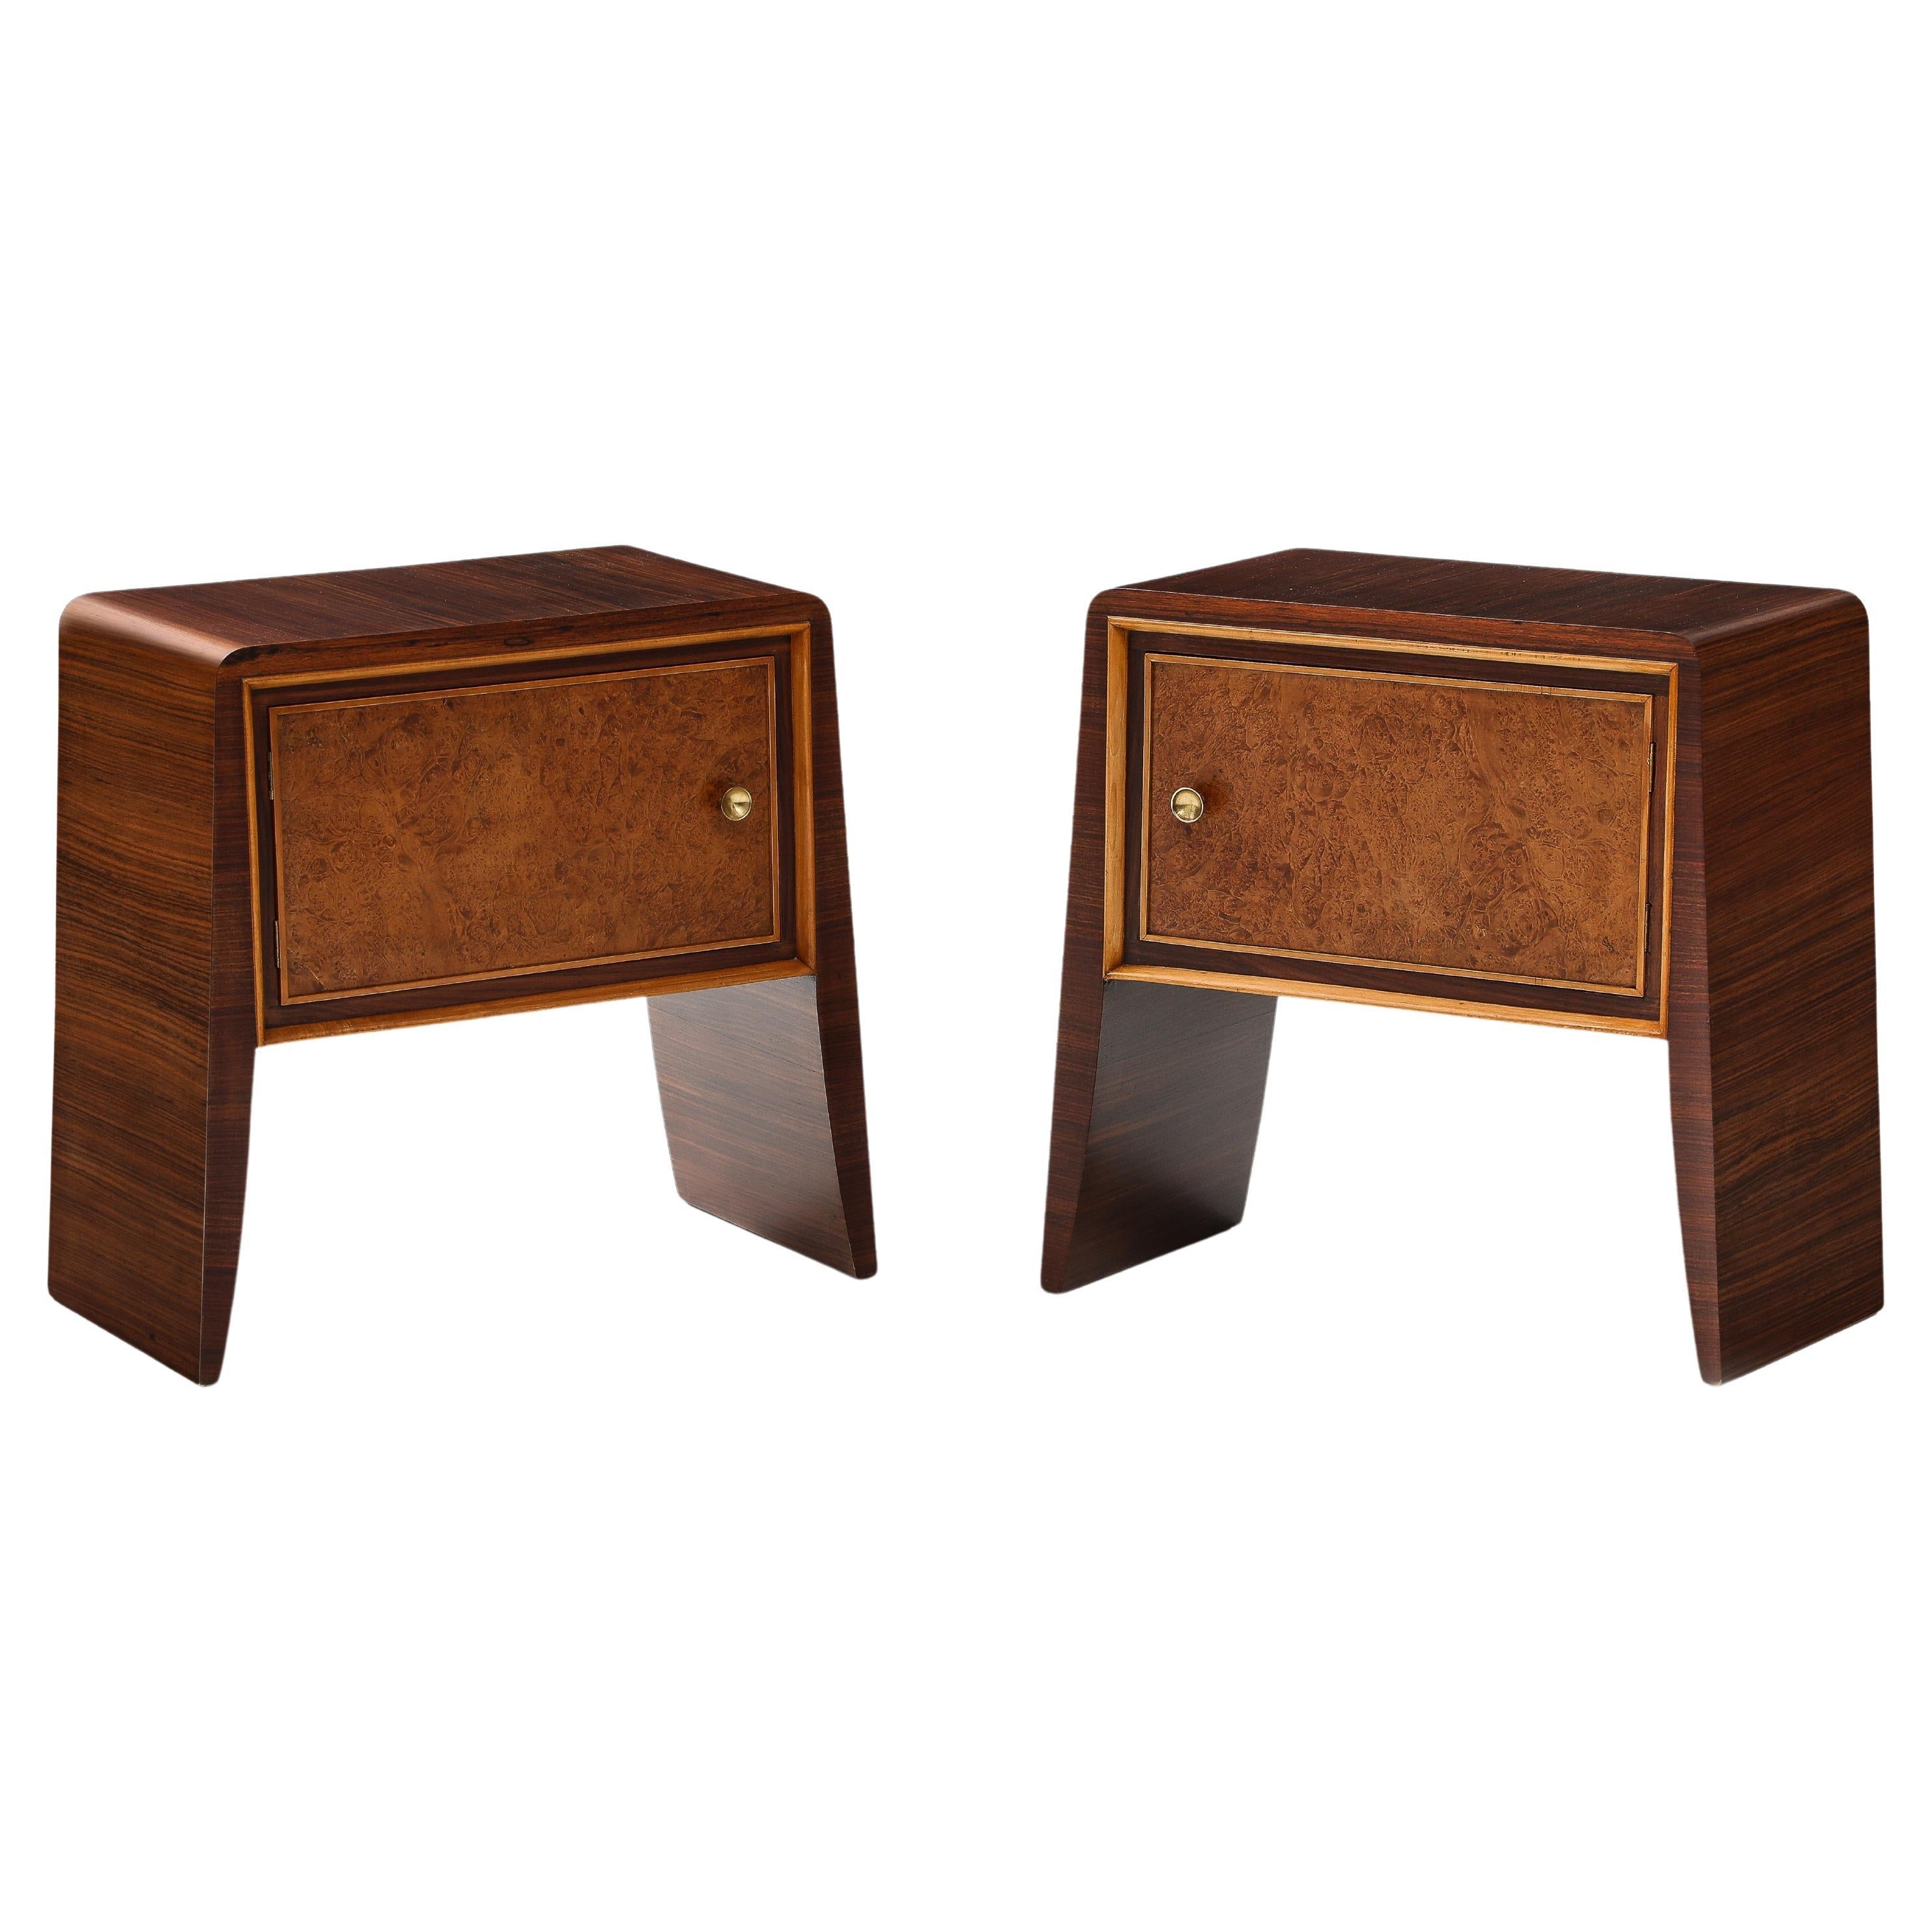 1950s Pair of Rosewood and Birchwood Nightstands or Bedside Tables For Sale